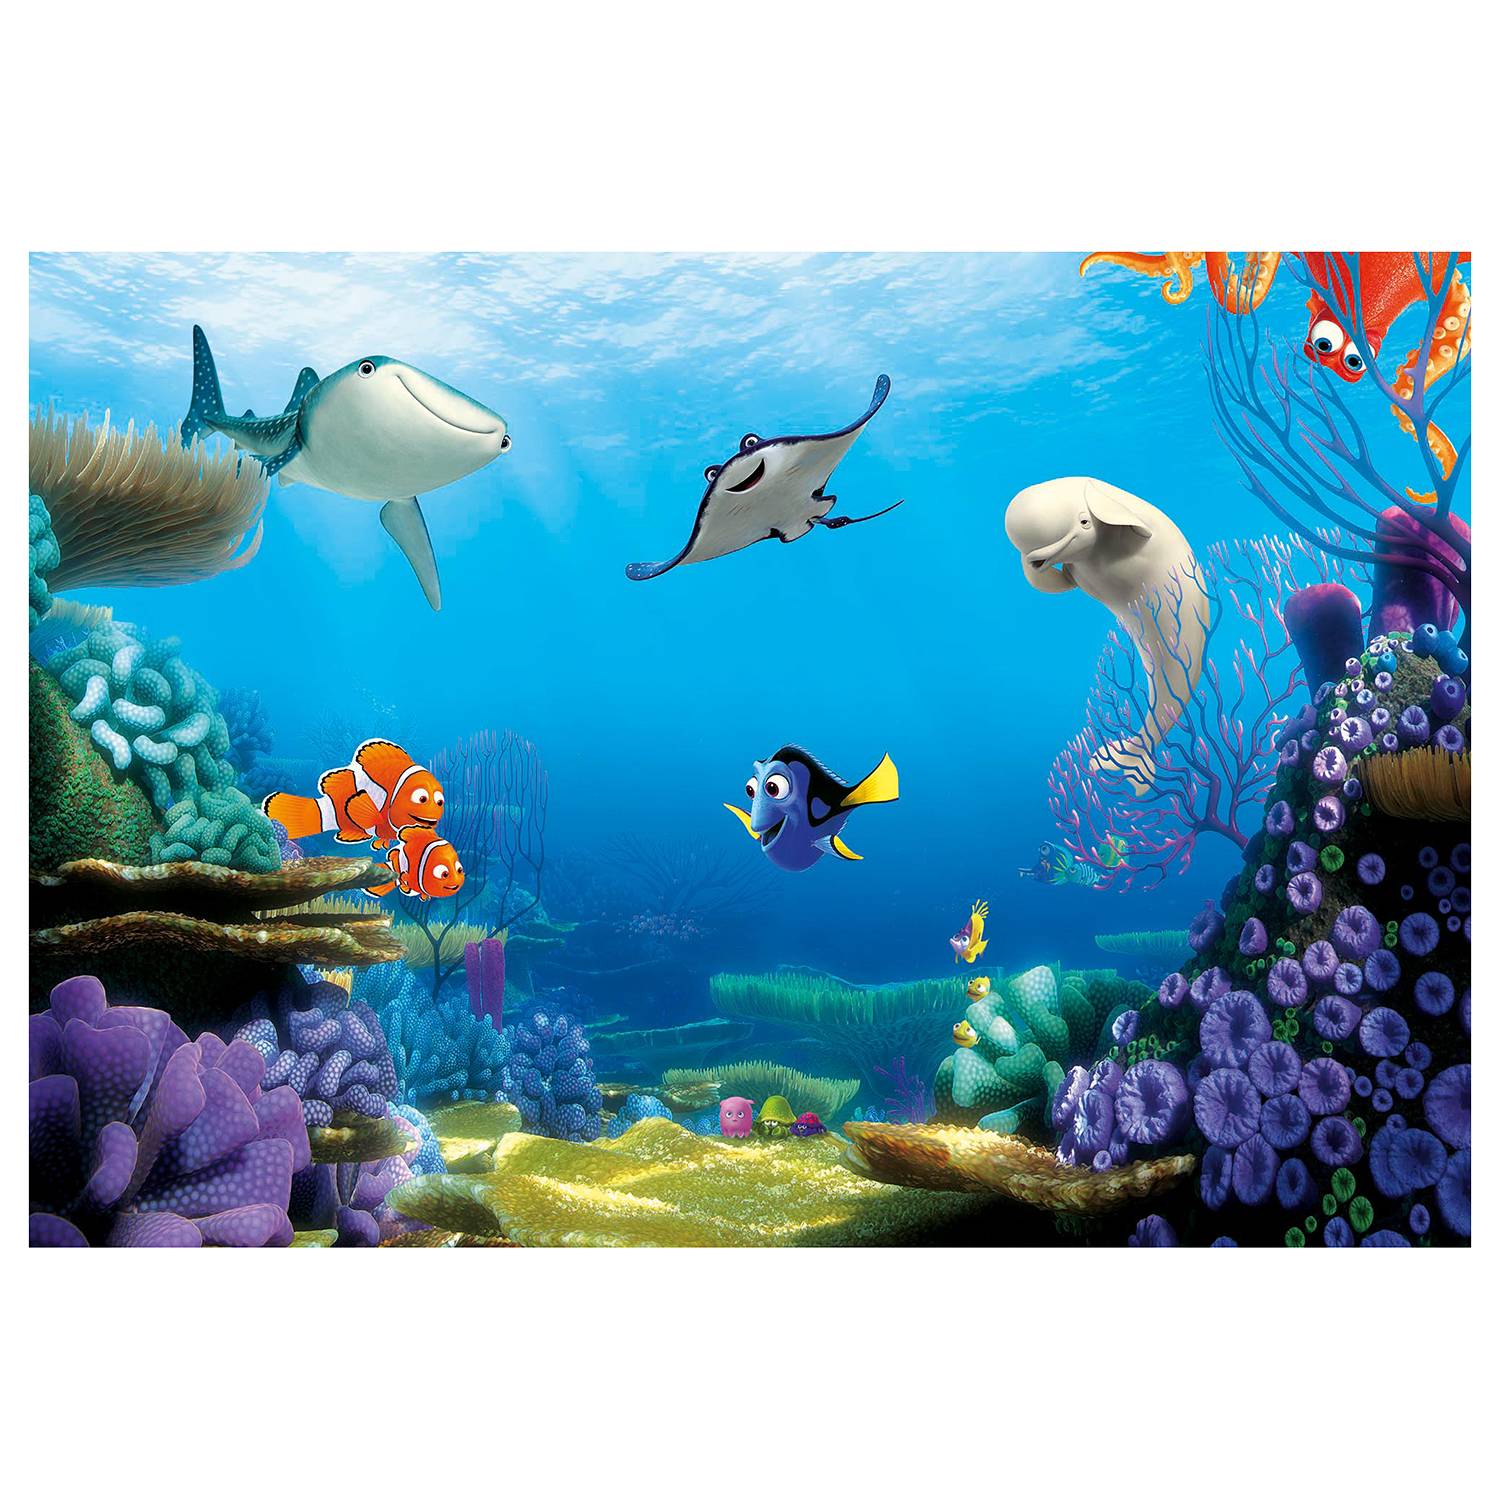 Fototapete Finding Dory kaufen | home24 | Poster